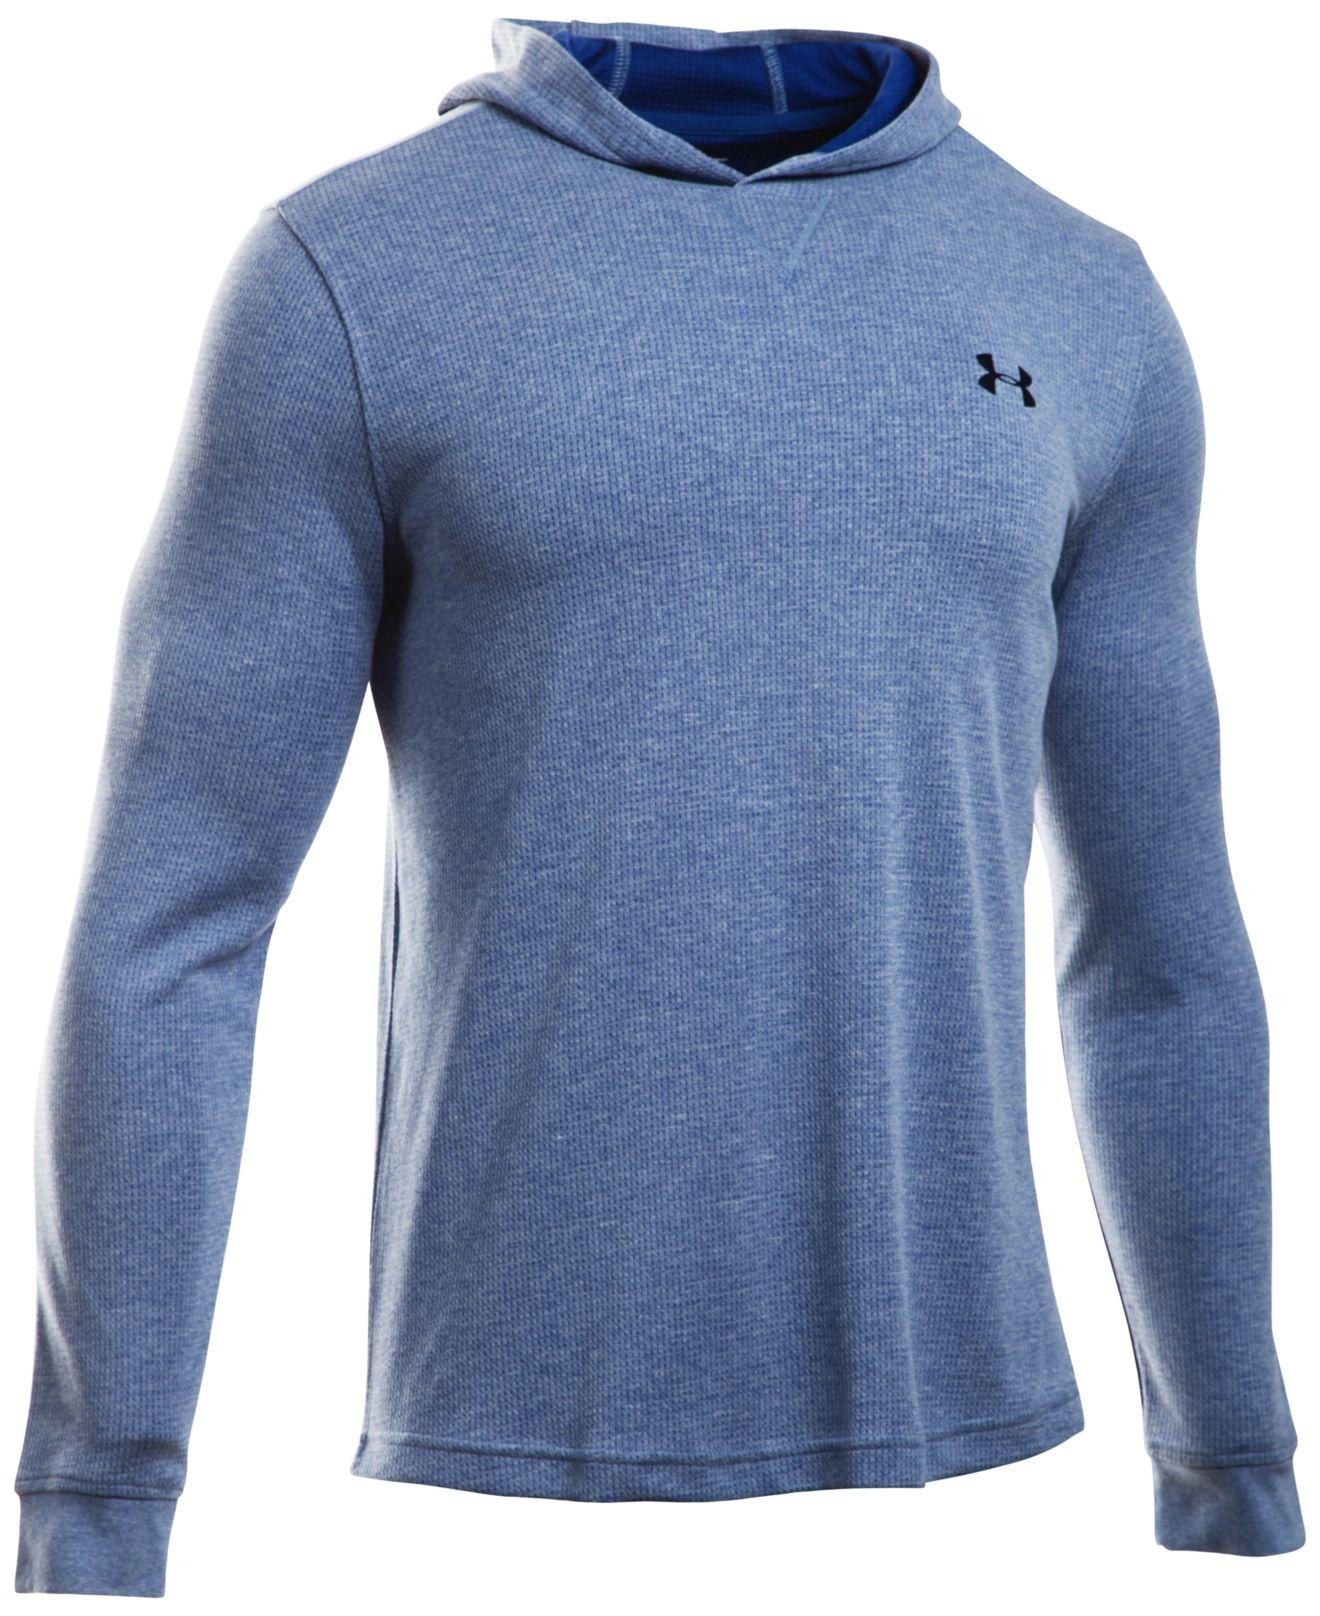 Lyst - Under armour Men's Waffle Thermal Shirt in Blue for Men